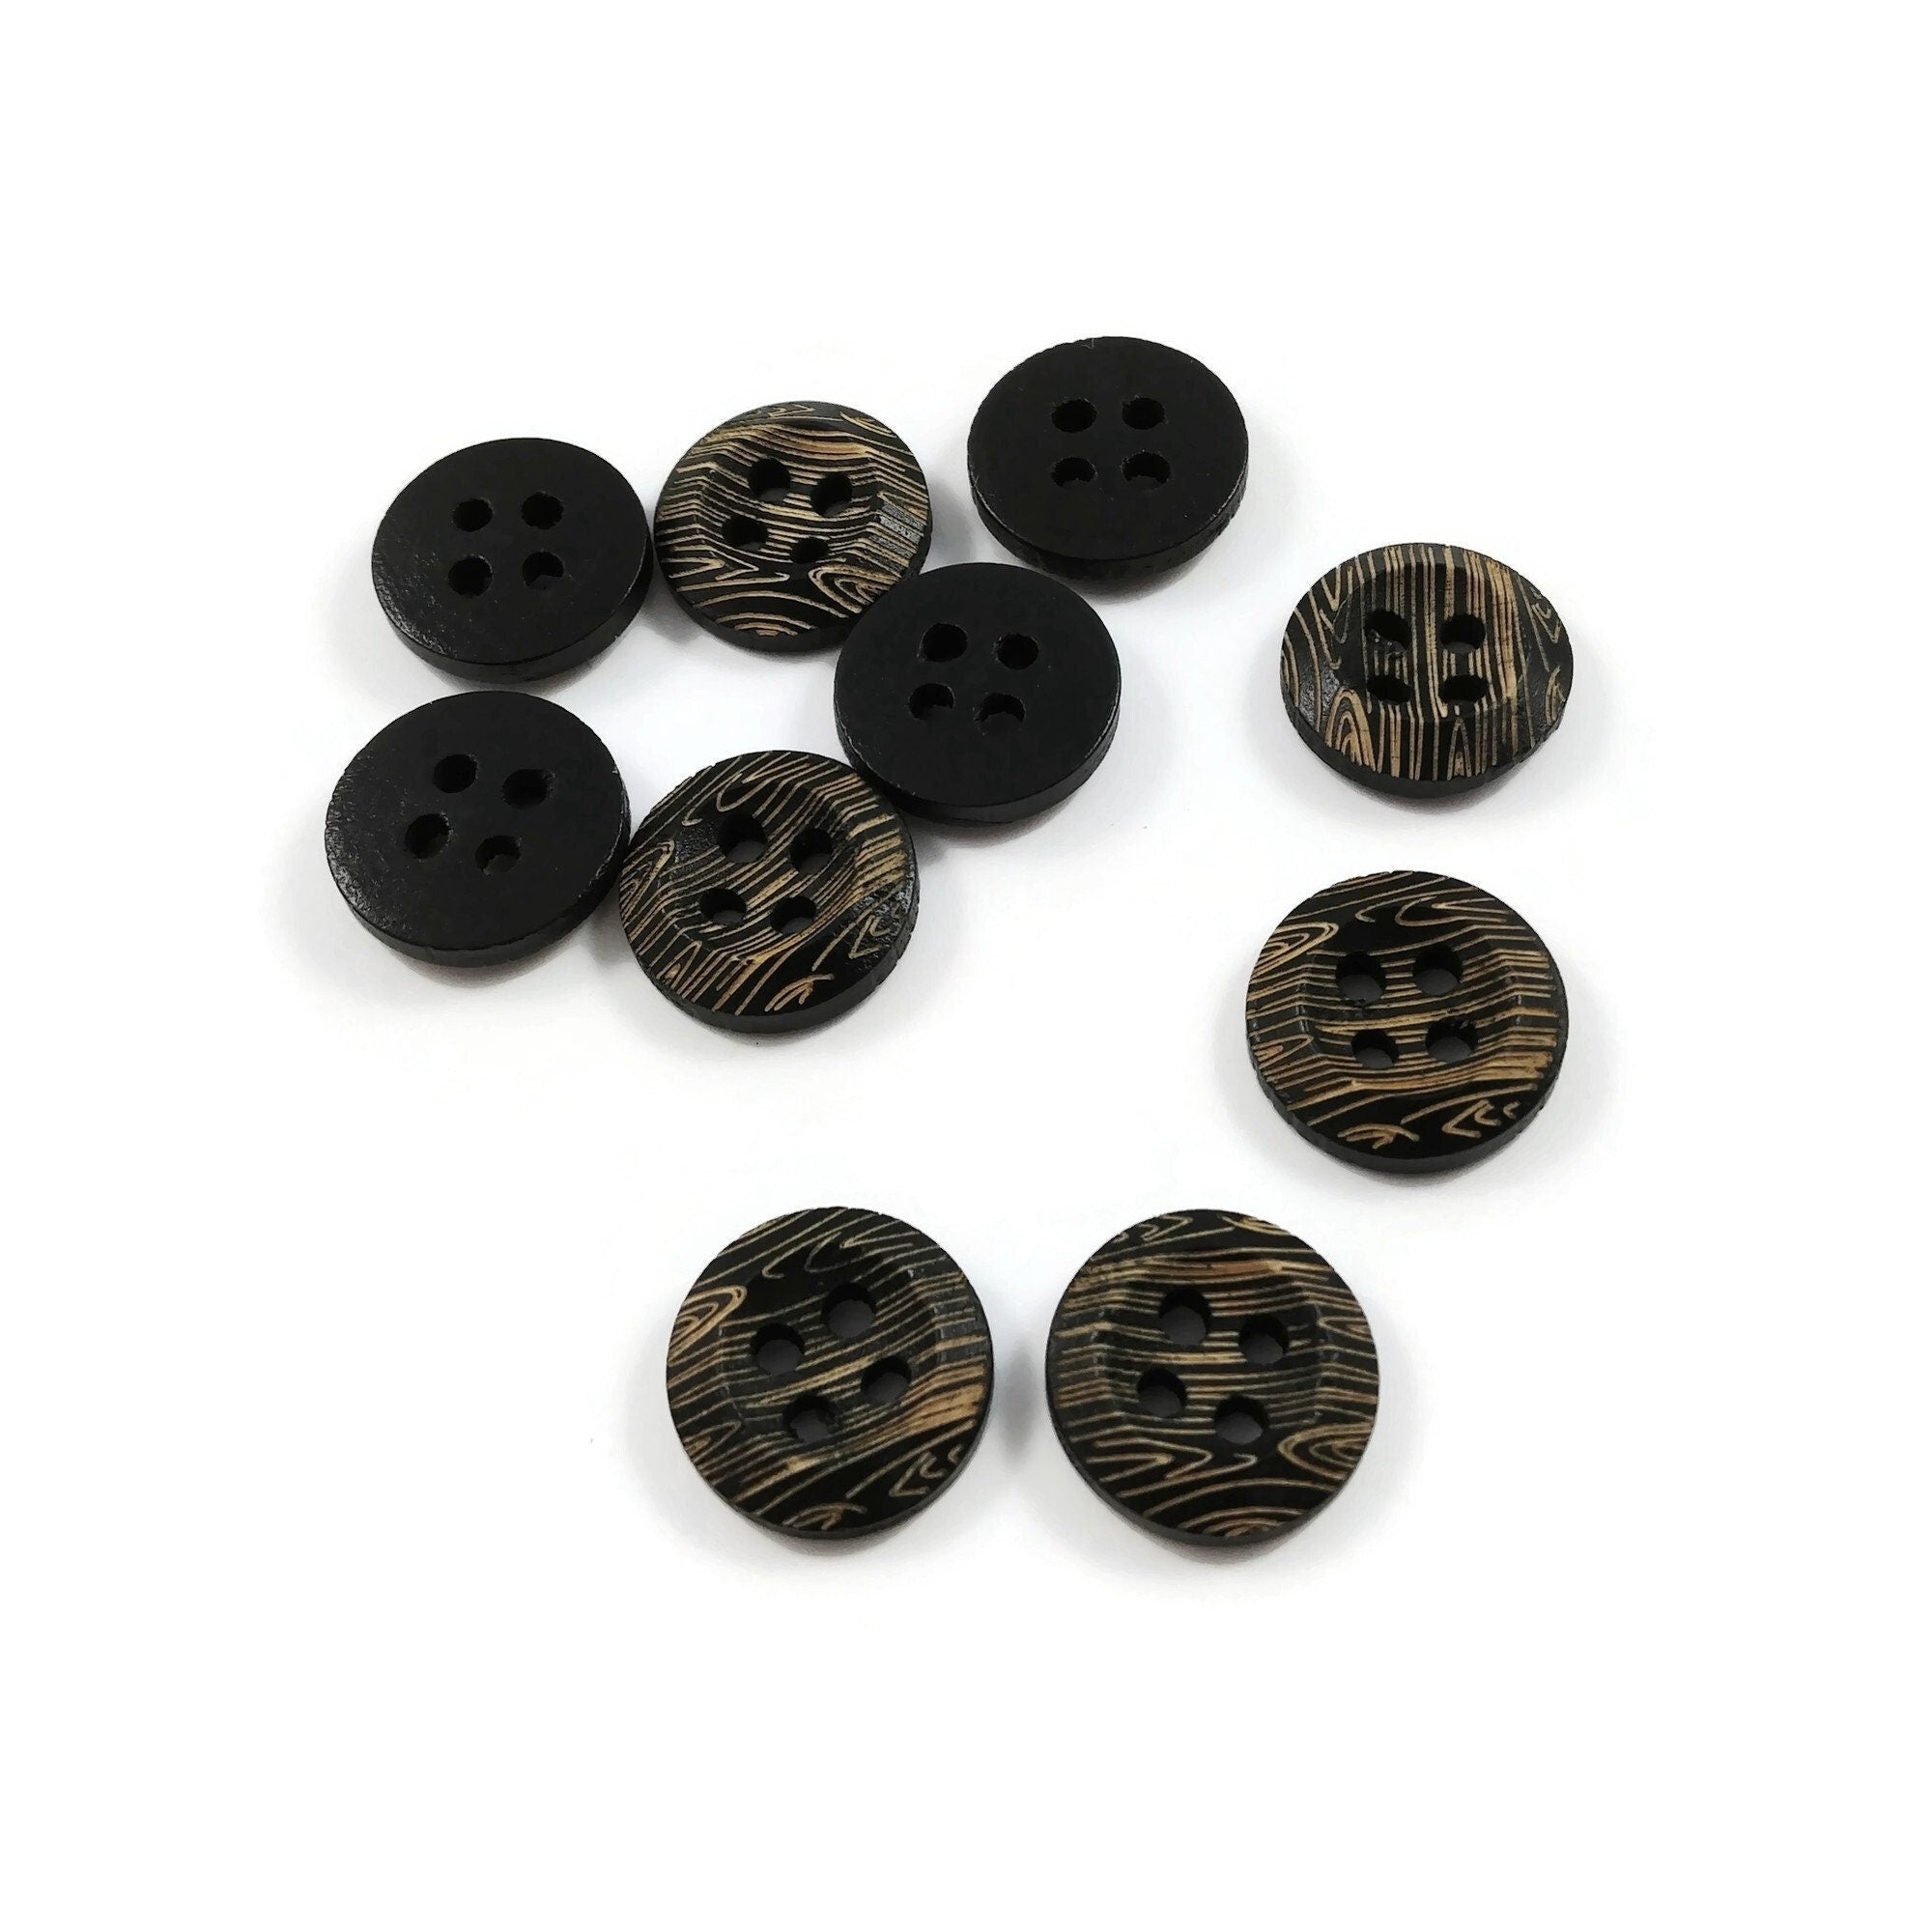 10mm tiny wooden buttons, 6 small natural buttons, Cute mini buttons f